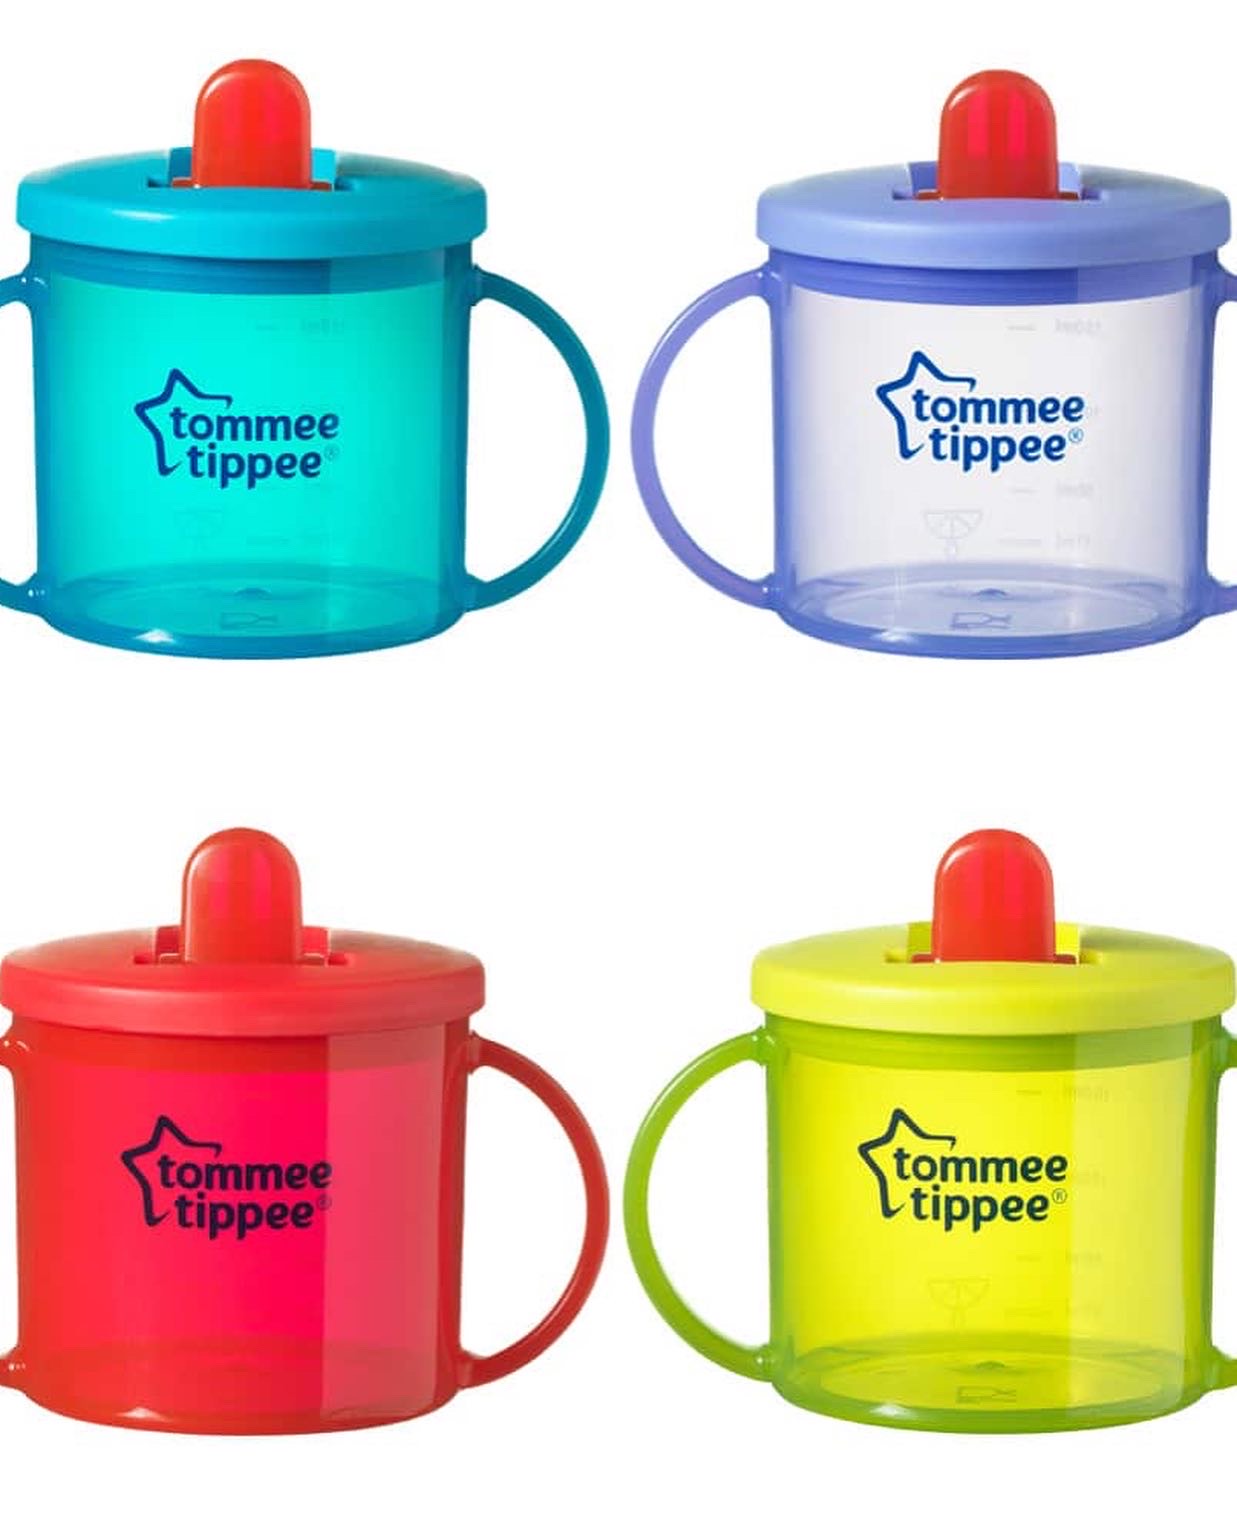 Tommee Tippee first cup